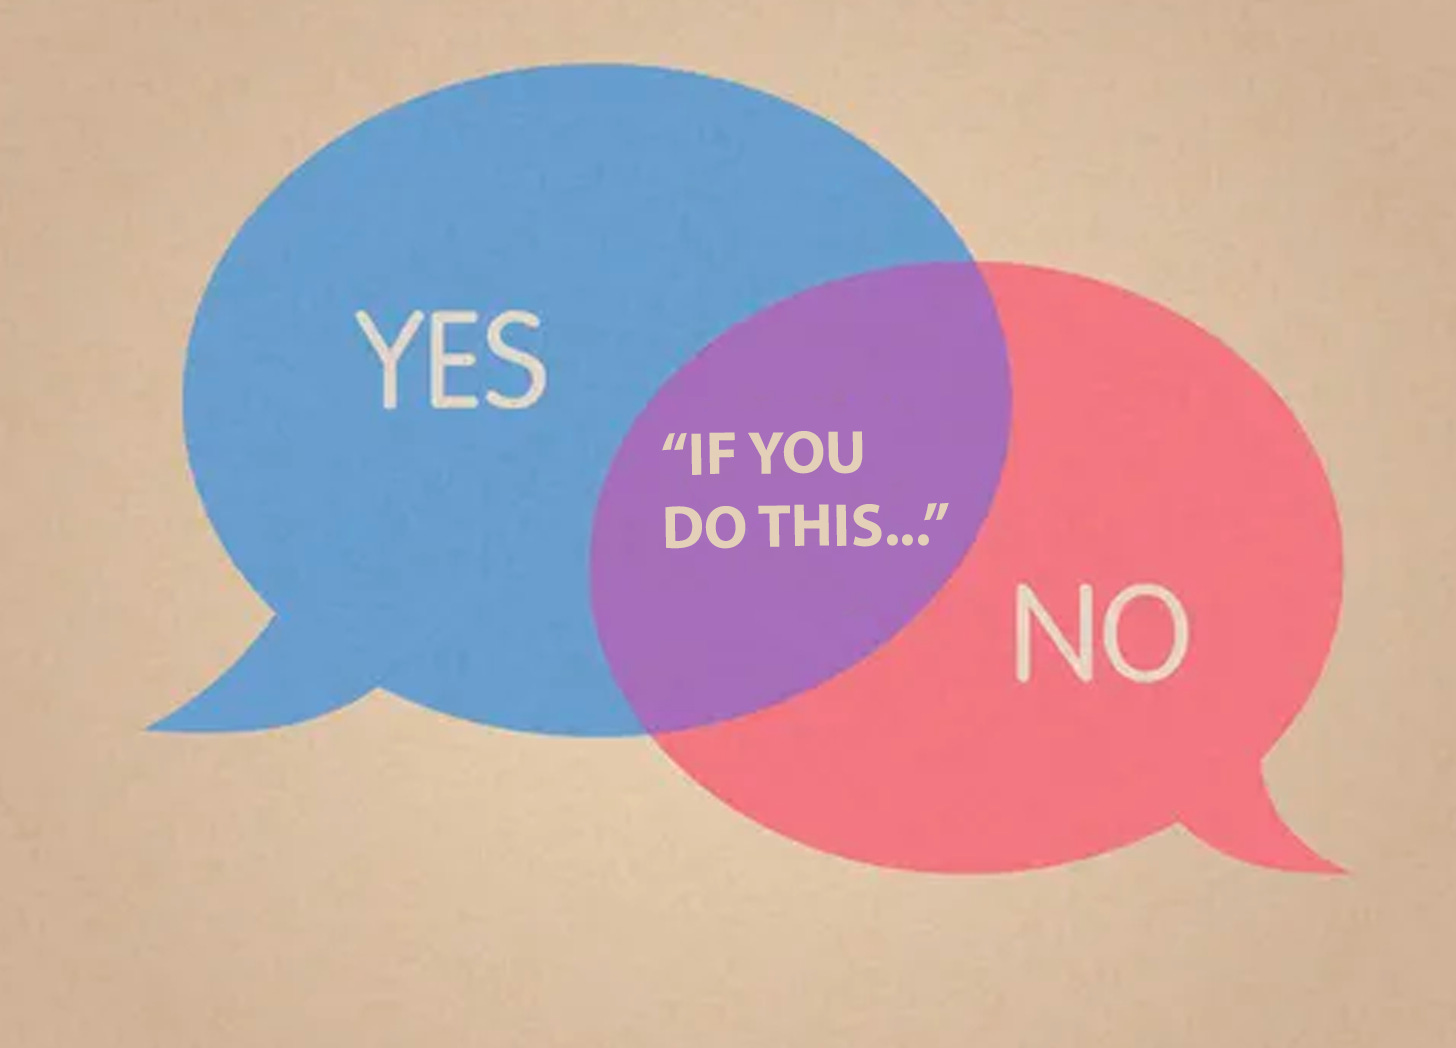 Two speech bubbles overlapping like a venn diagram. "No", "Yes", and overlapping part says "If you do this..."